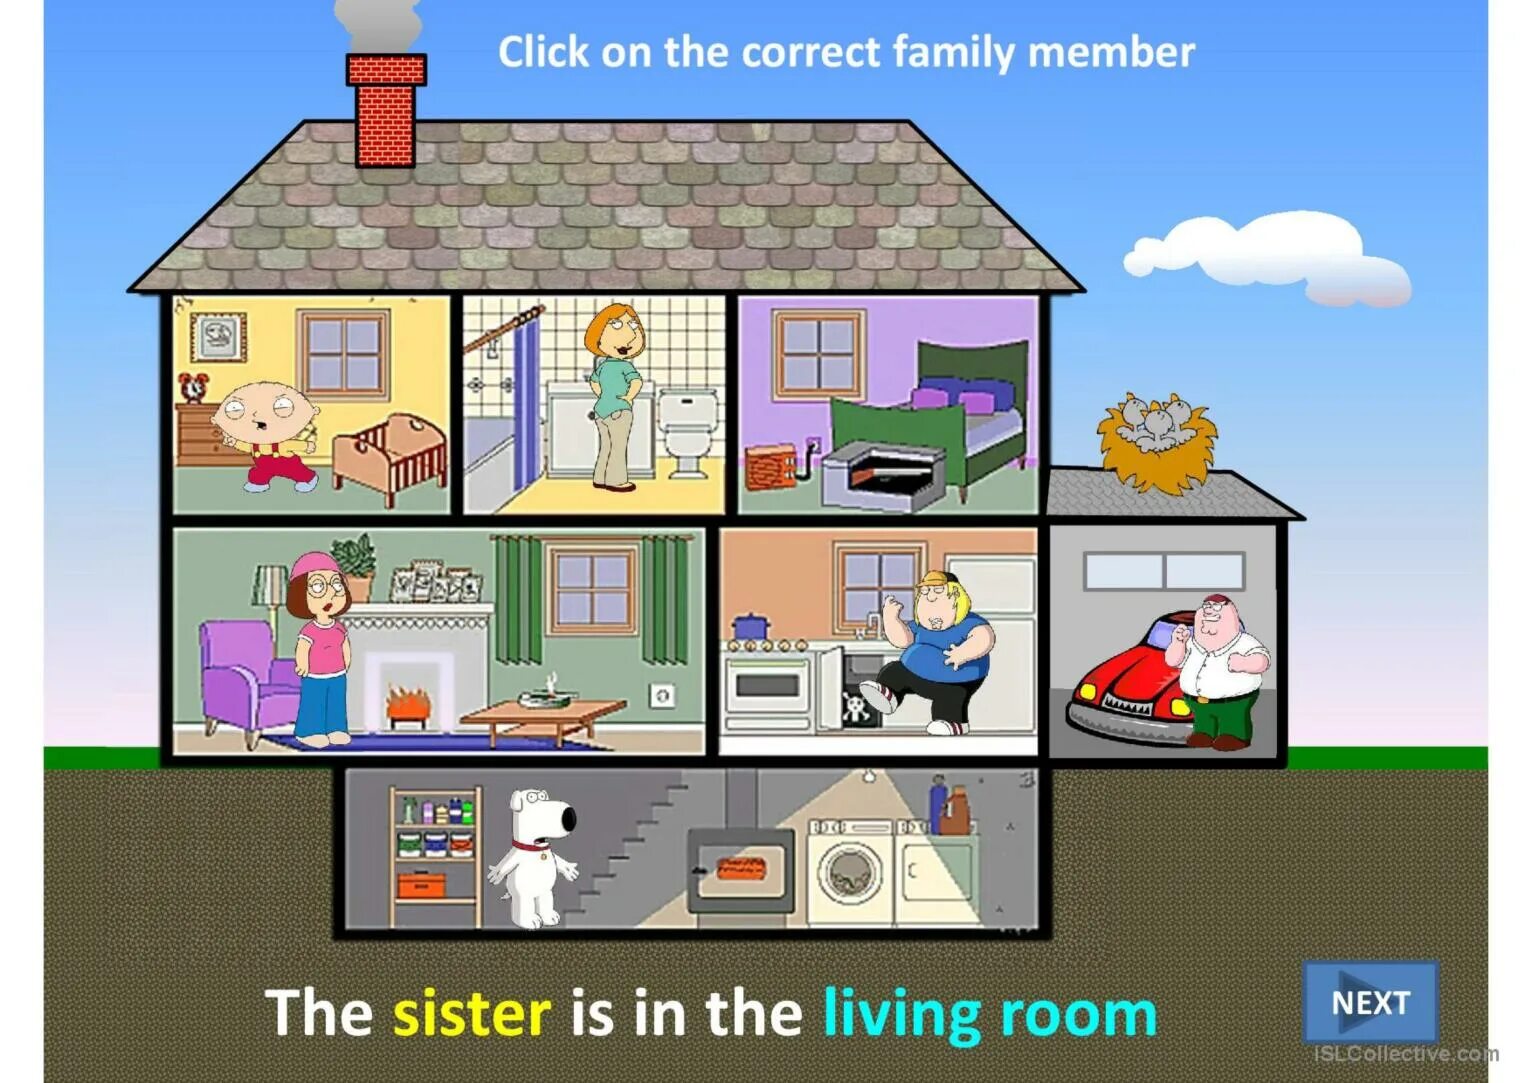 Rooms in the House for Kids. Rooms in my House. Rooms in the House Worksheets. Family members in a House. My house is very funny